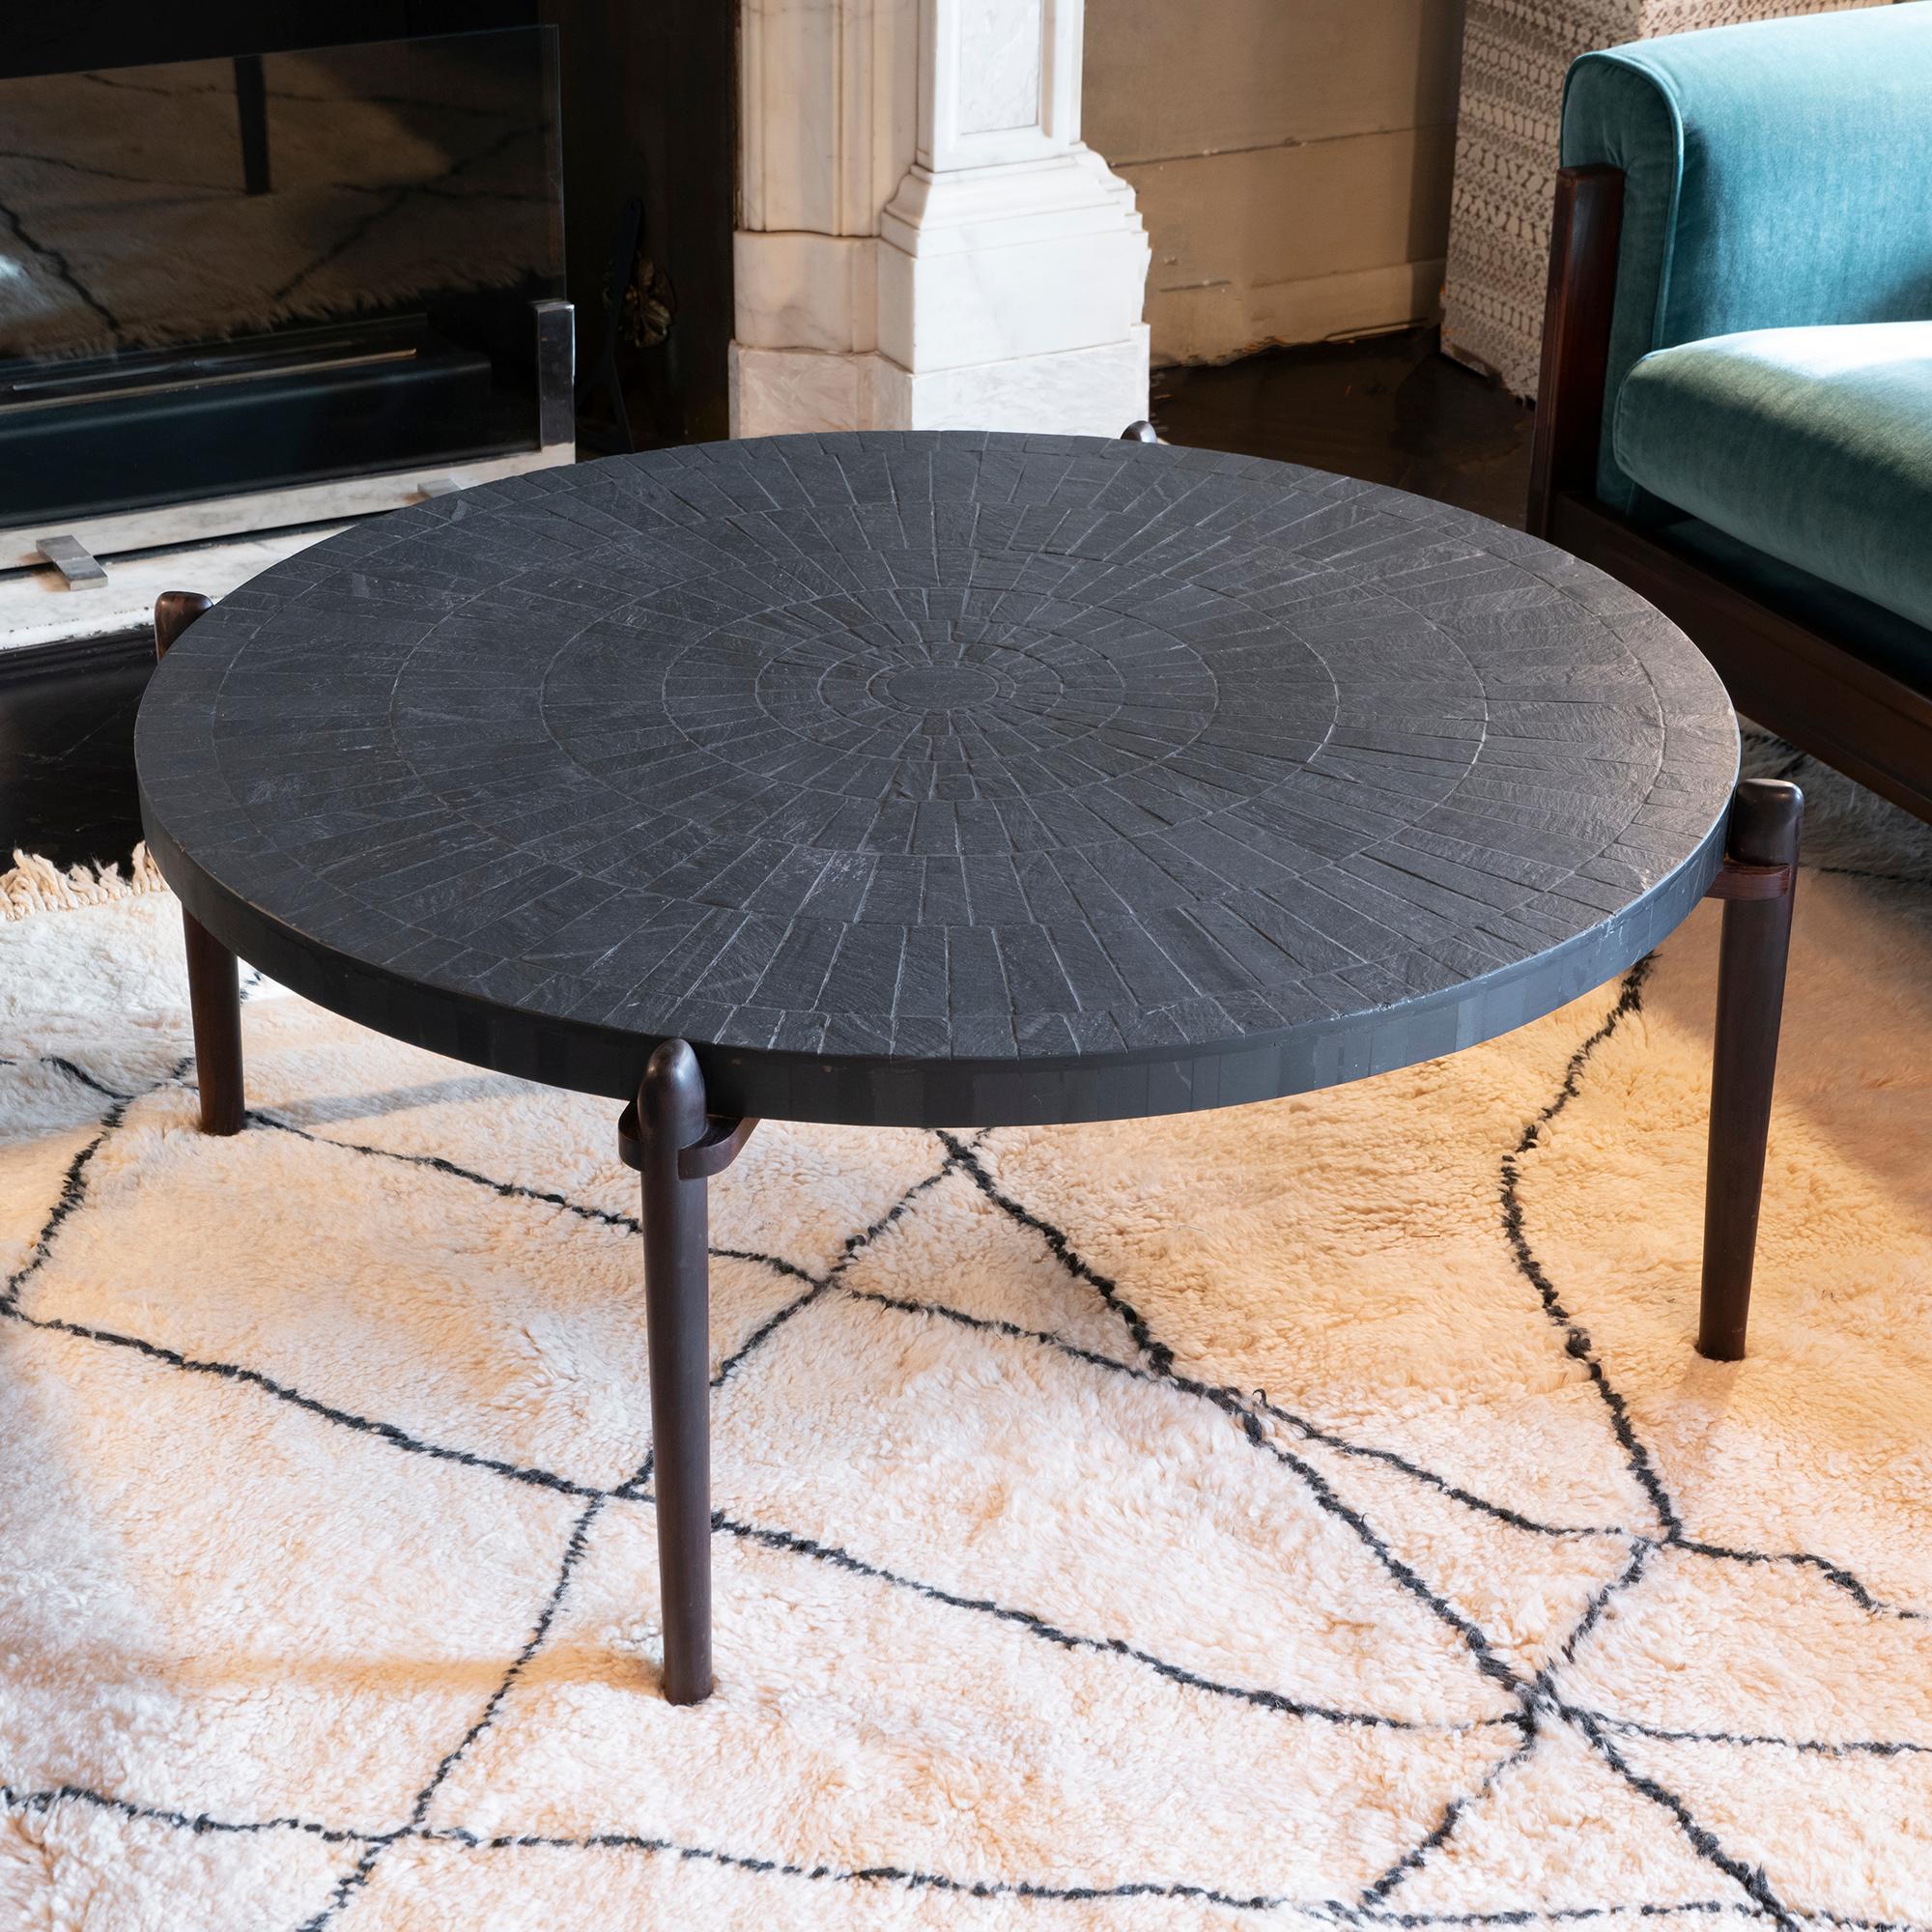 Mid-Century Modern round coffee table with inlay slate top (diameter cm110) with palisander legs, perfect condition and vintage patina, some slight chipping on the top, Belgium, 1960s.